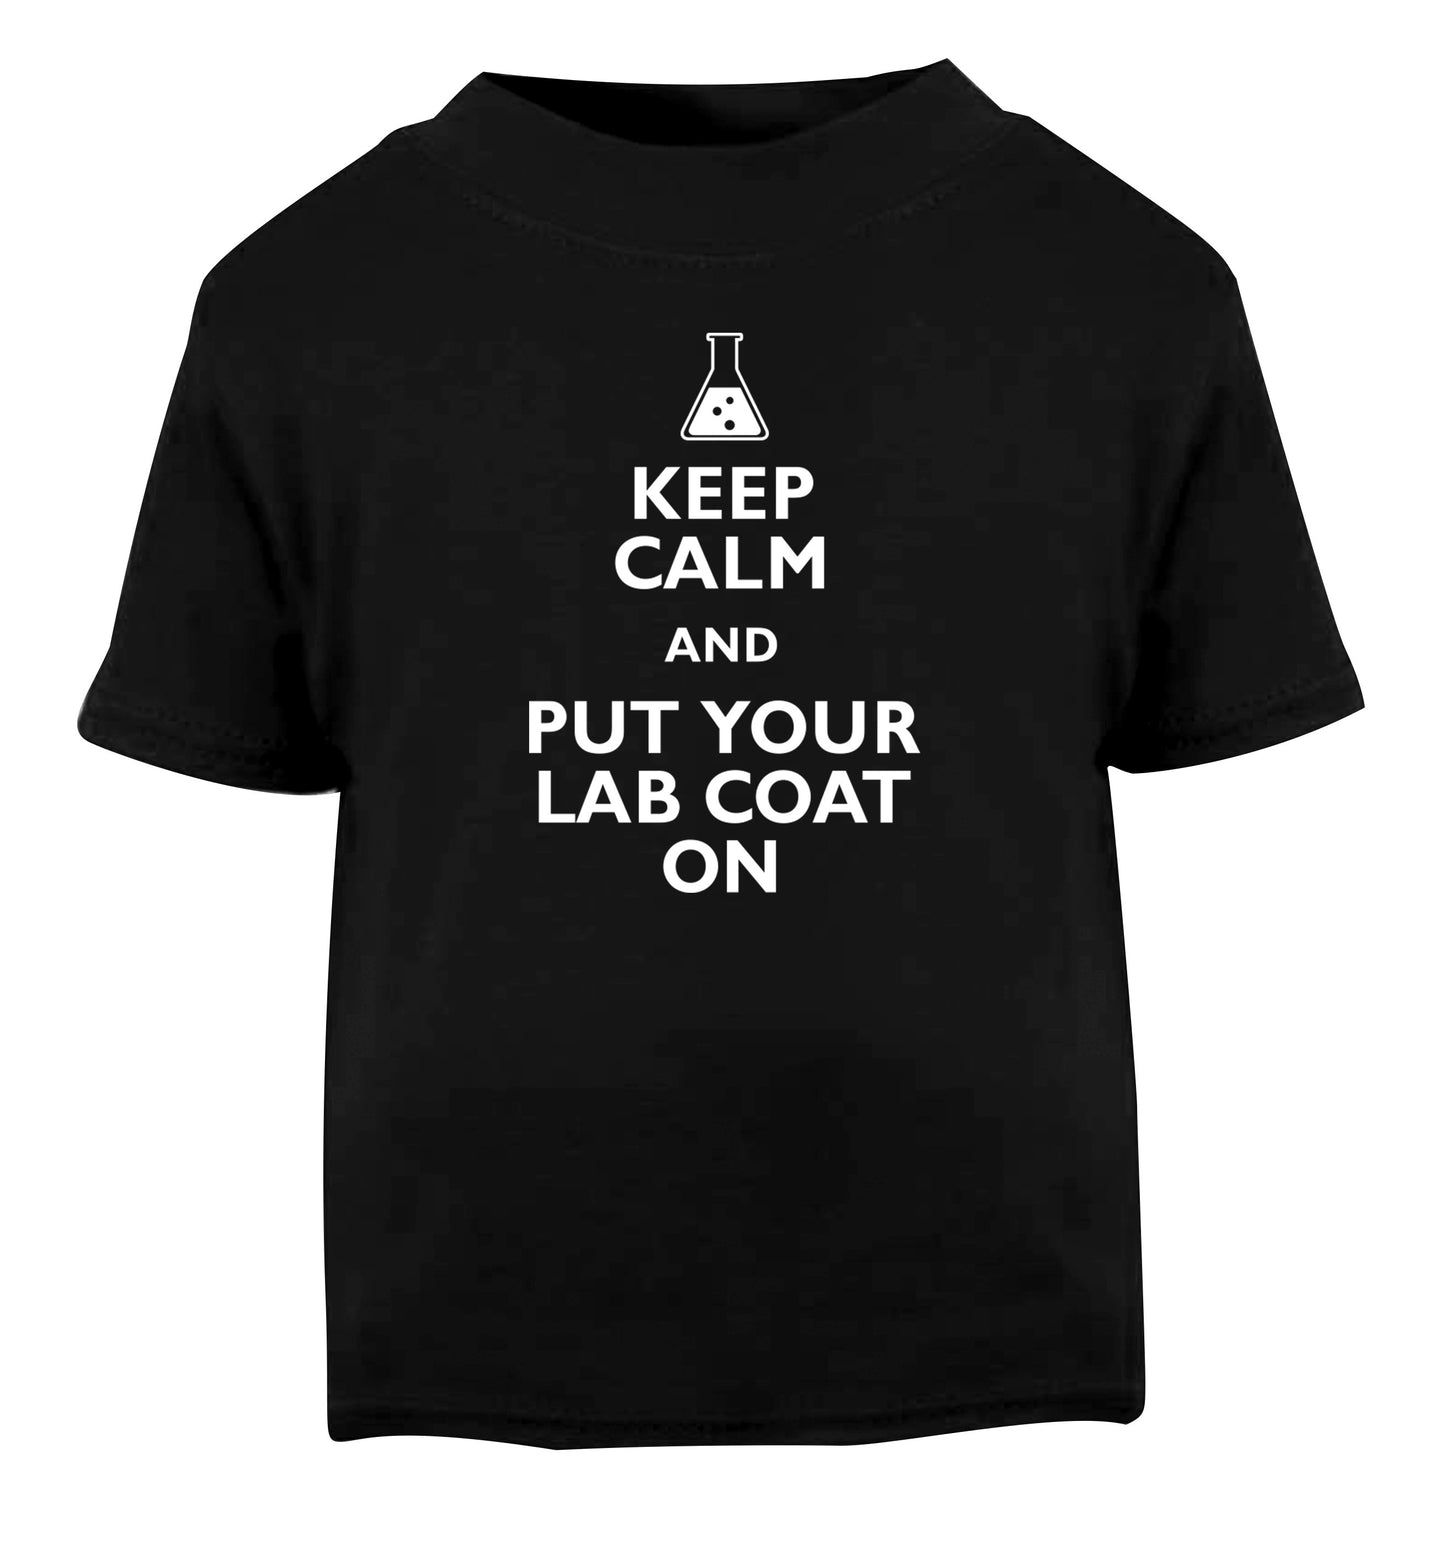 Keep calm and put your lab coat on Black Baby Toddler Tshirt 2 years